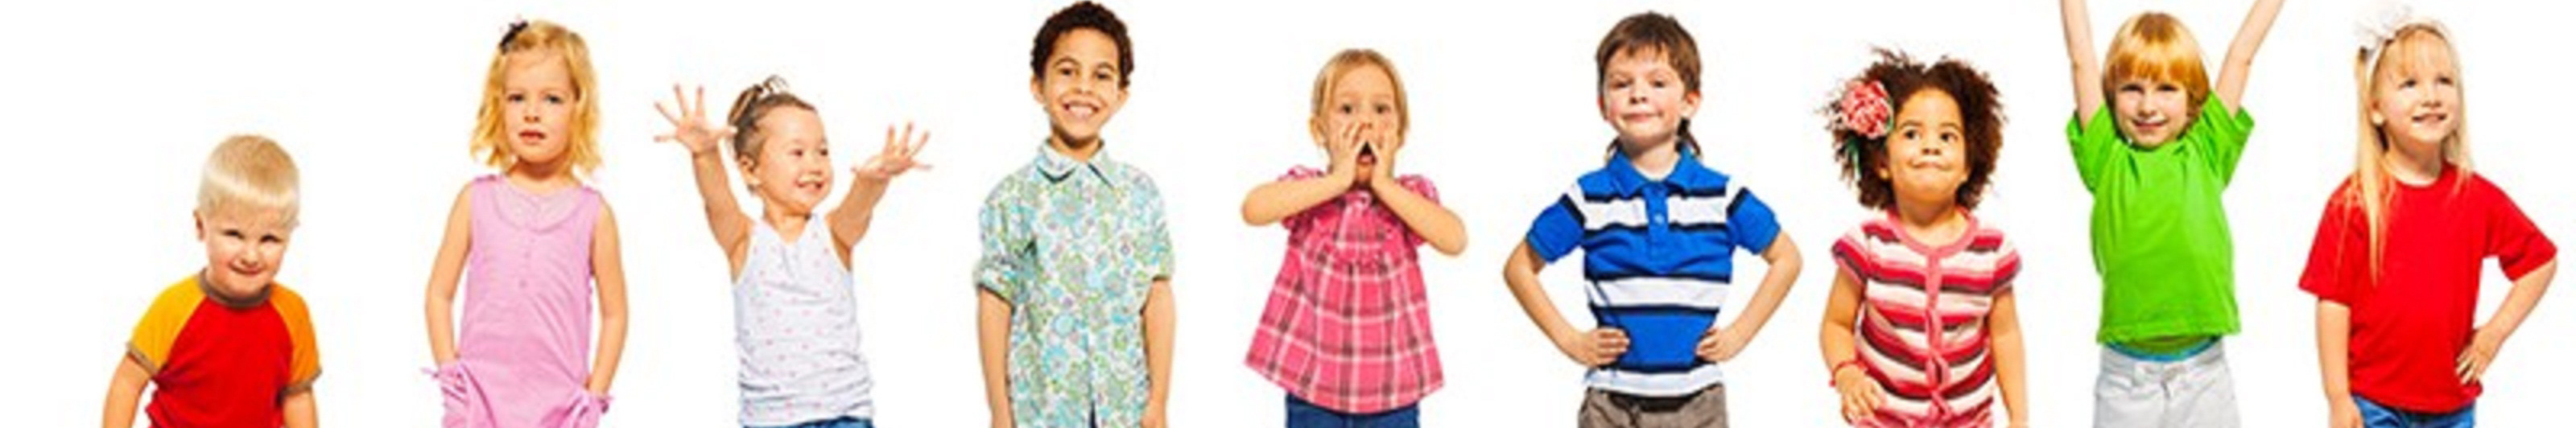 Aspire Early Intervention's profile banner